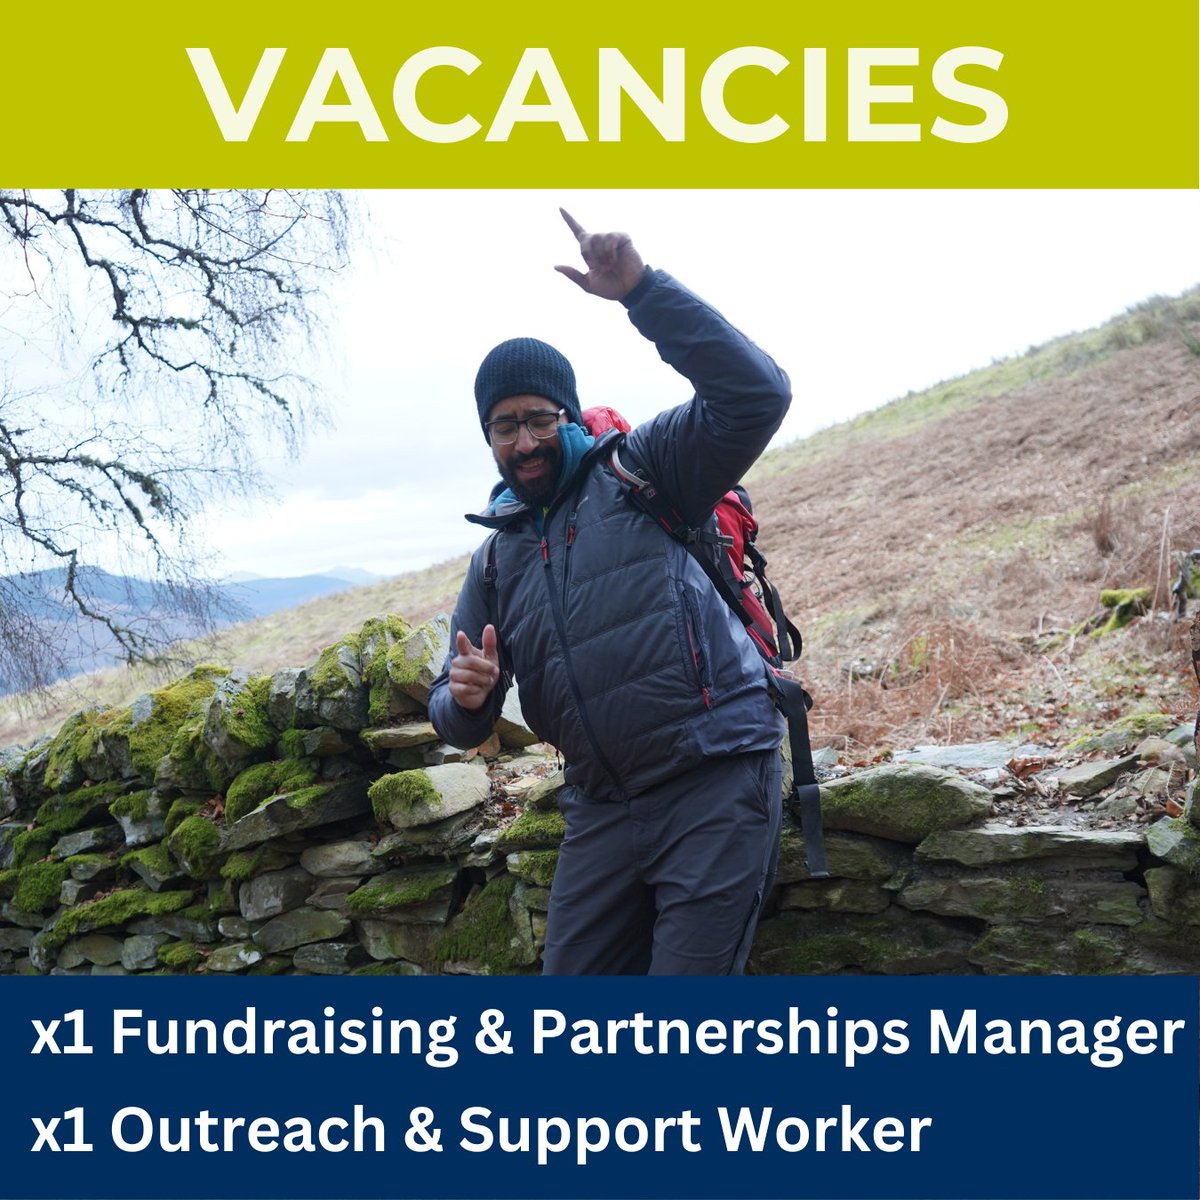 🌟📢 Vacancies reminder 📢🌟 📌 Fundraising & Partnerships Manager (closing 10/3) 📌 Outreach & Support Worker (closing 25/3) ow.ly/m7XS50QNrCX #WorkWithPurpose #Hiring #ThirdsectorJobs